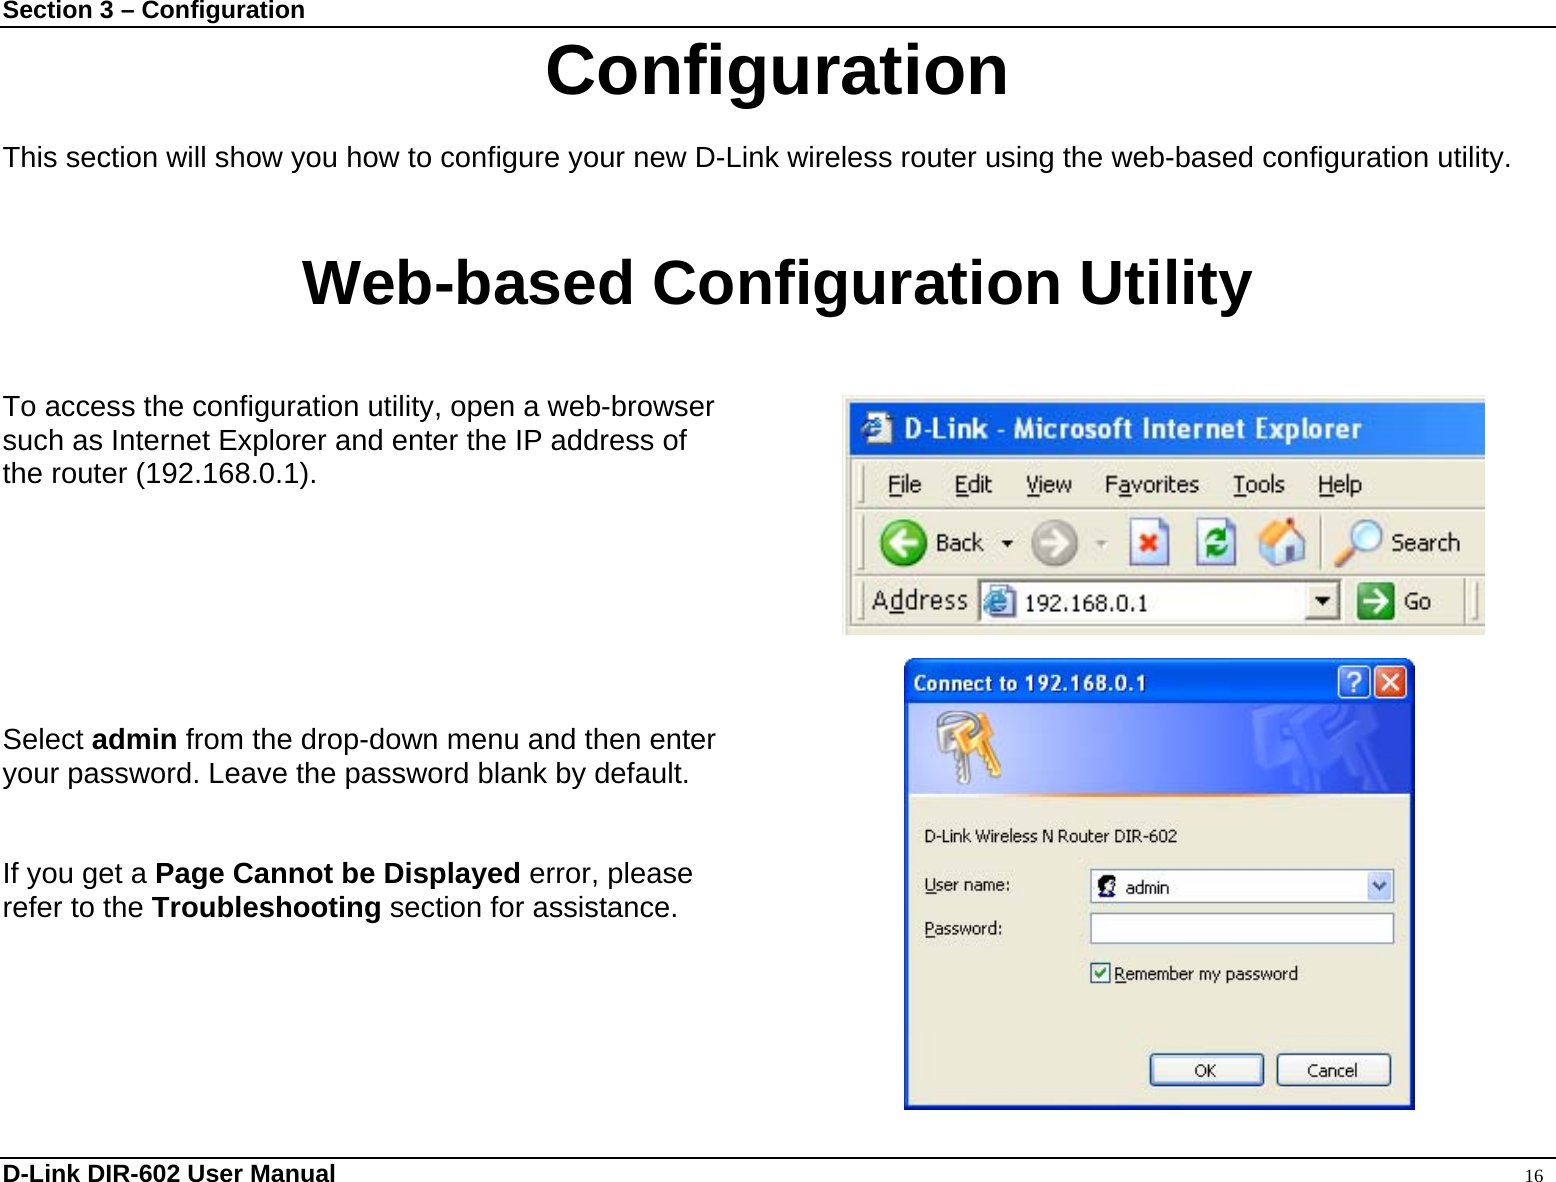 Section 3 – Configuration  Configuration  This section will show you how to configure your new D-Link wireless router using the web-based configuration utility.  Web-based Configuration Utility  To access the configuration utility, open a web-browser   such as Internet Explorer and enter the IP address of the router (192.168.0.1).        Select admin from the drop-down menu and then enter your password. Leave the password blank by default.   If you get a Page Cannot be Displayed error, please refer to the Troubleshooting section for assistance.      D-Link DIR-602 User Manual                                                                                               16 